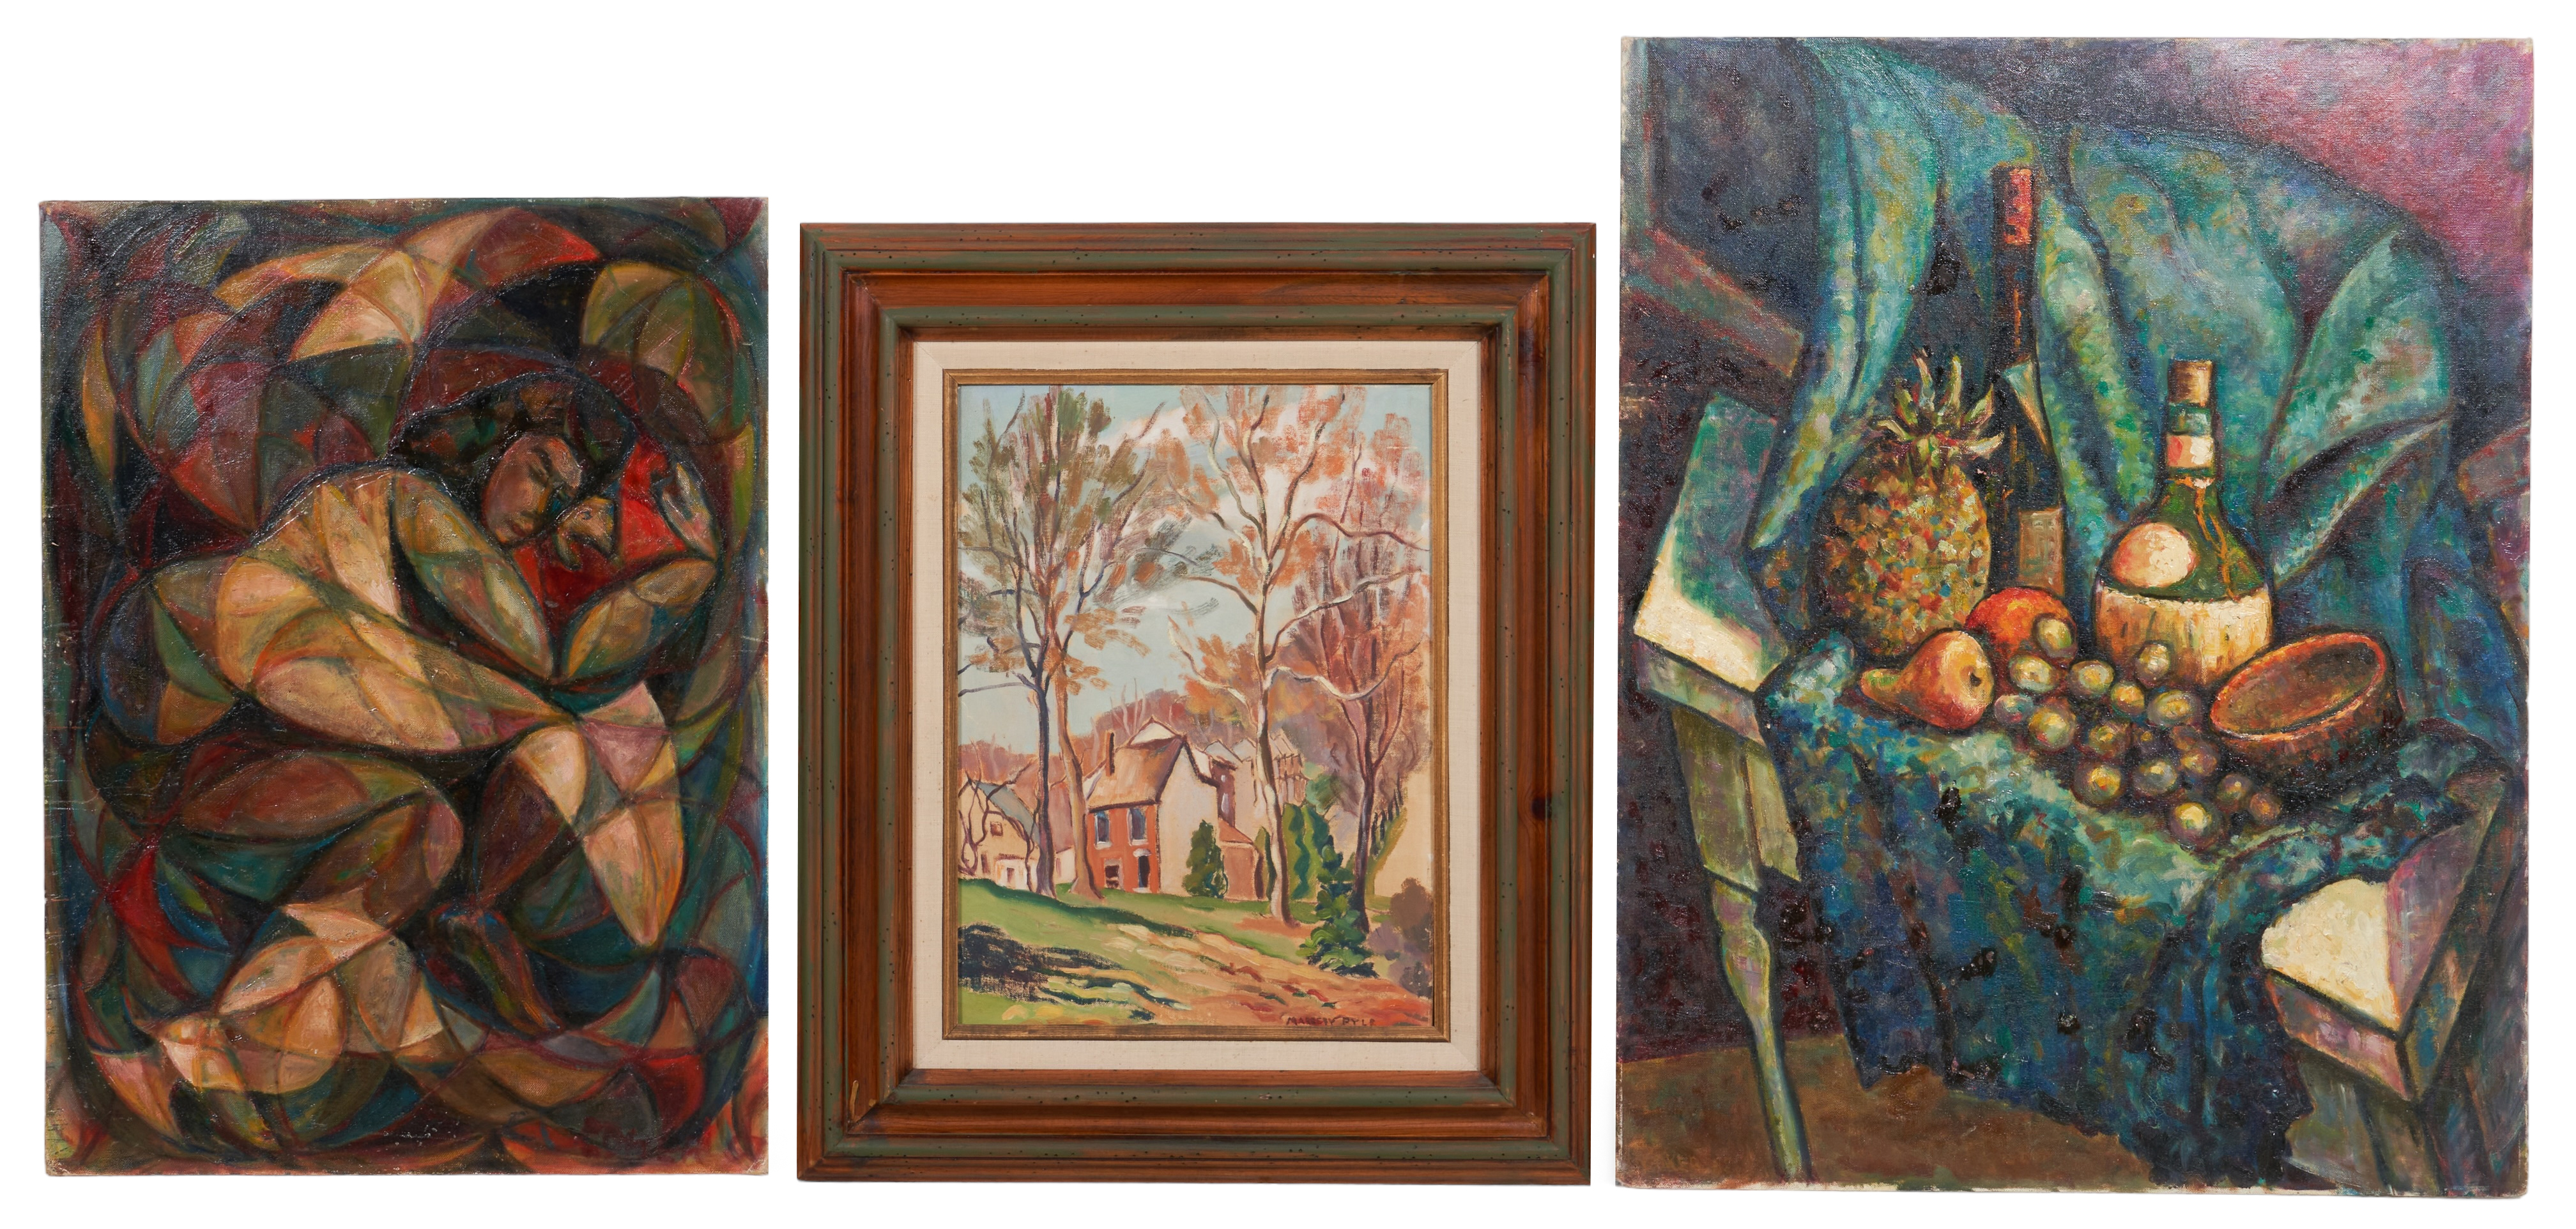  3 Paintings by Delaware artists  2e221e